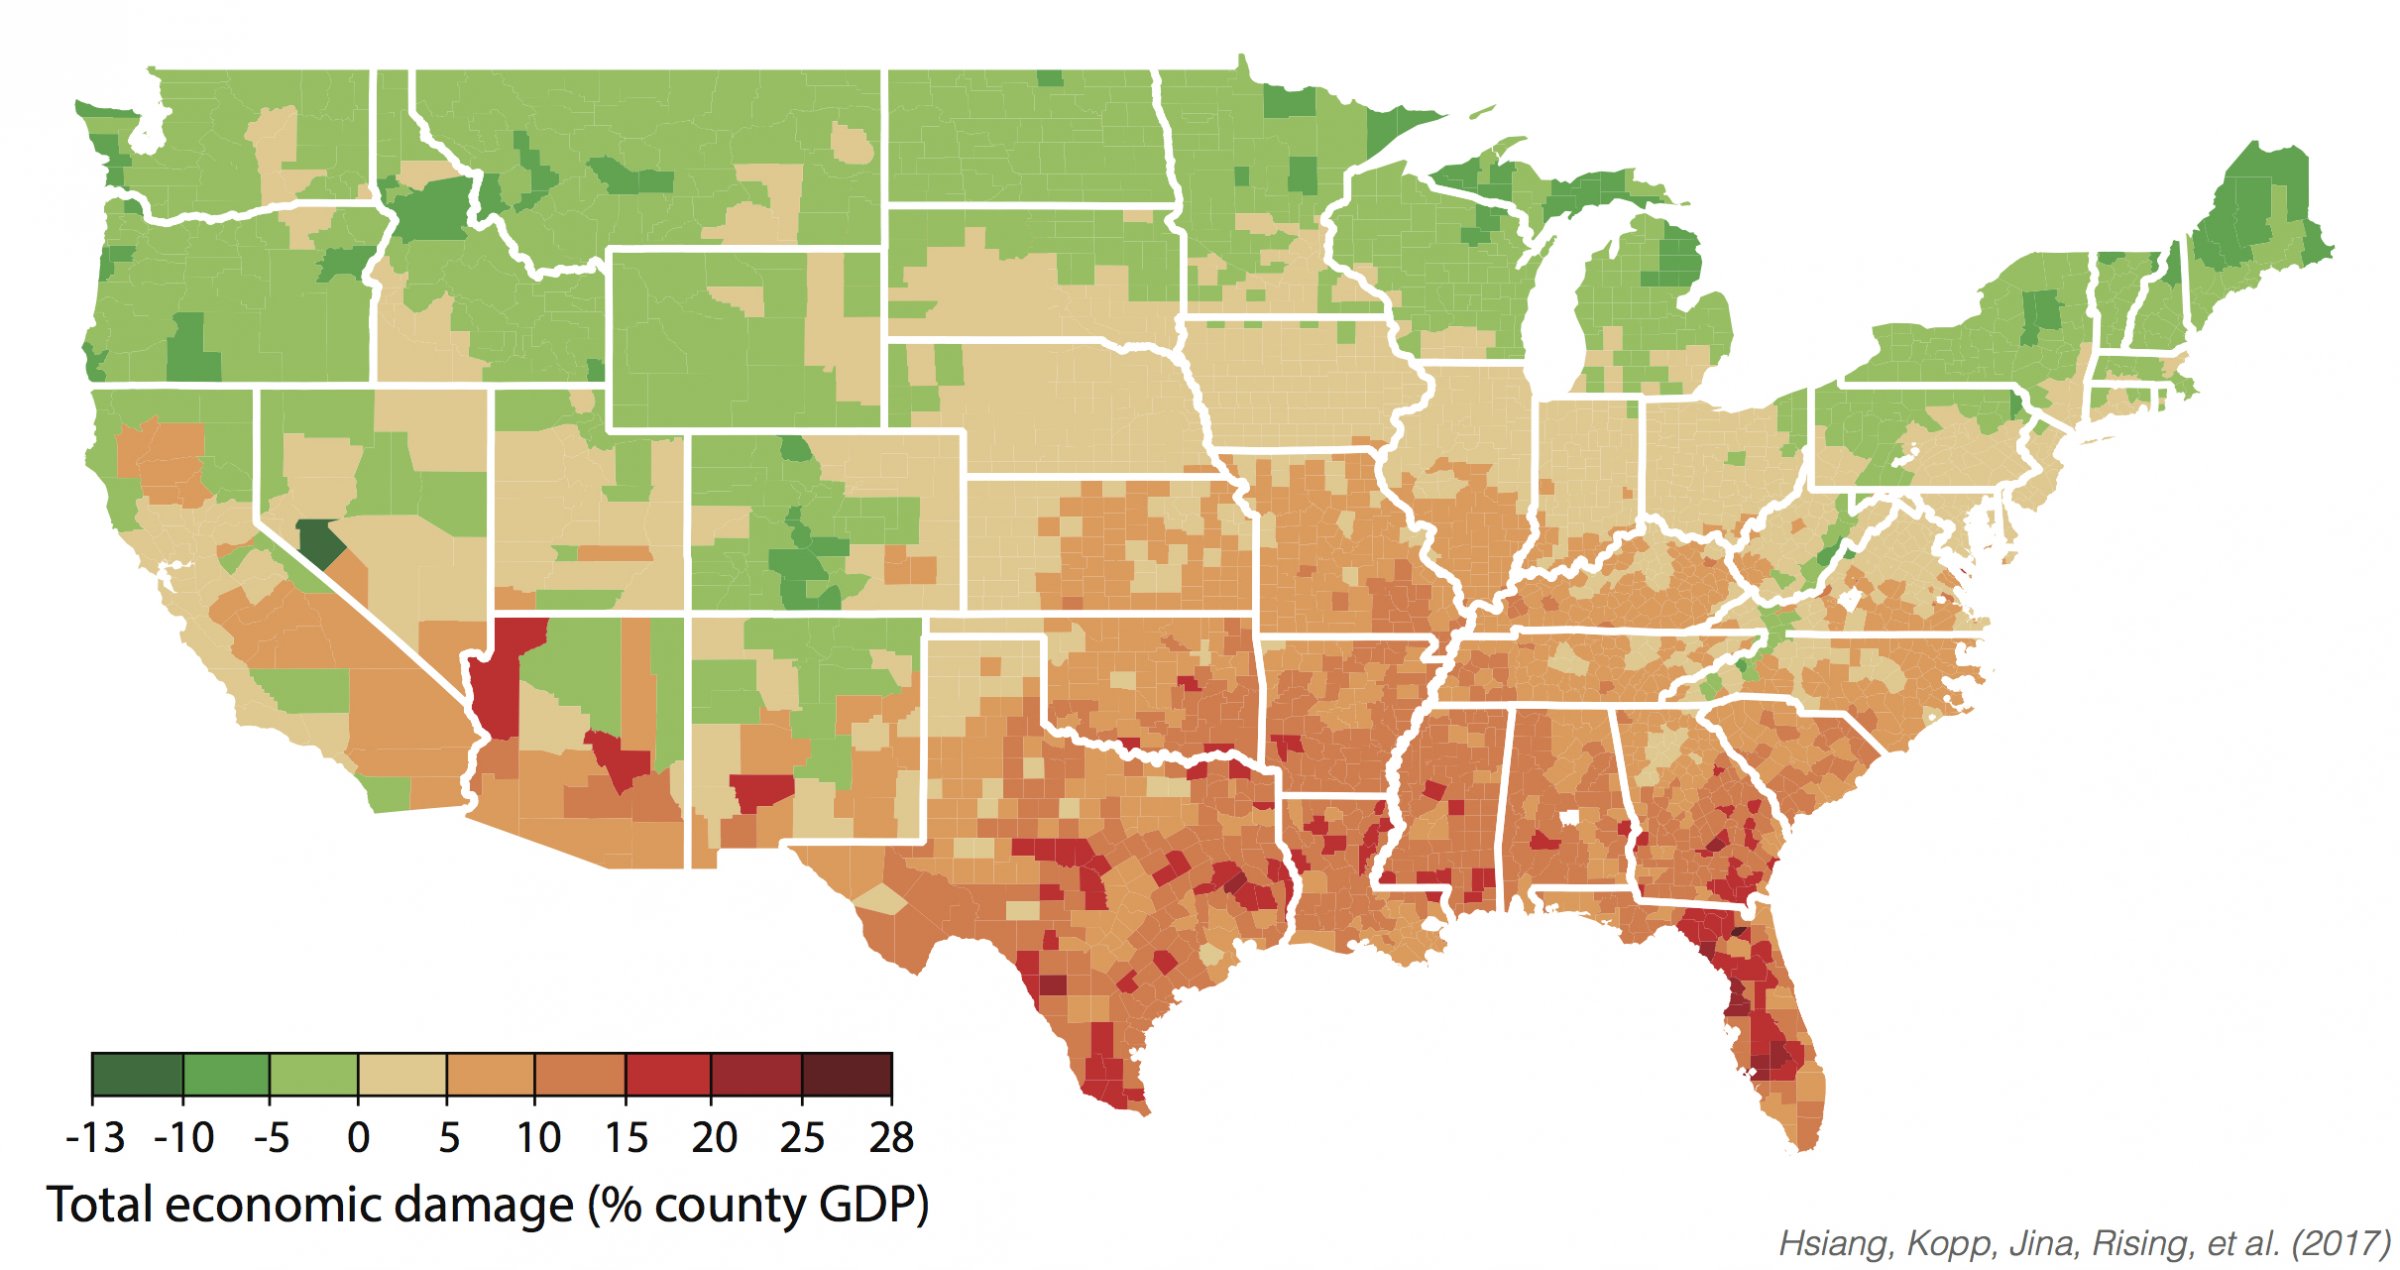 Here’s where rising temperatures will have the biggest impact on the economy